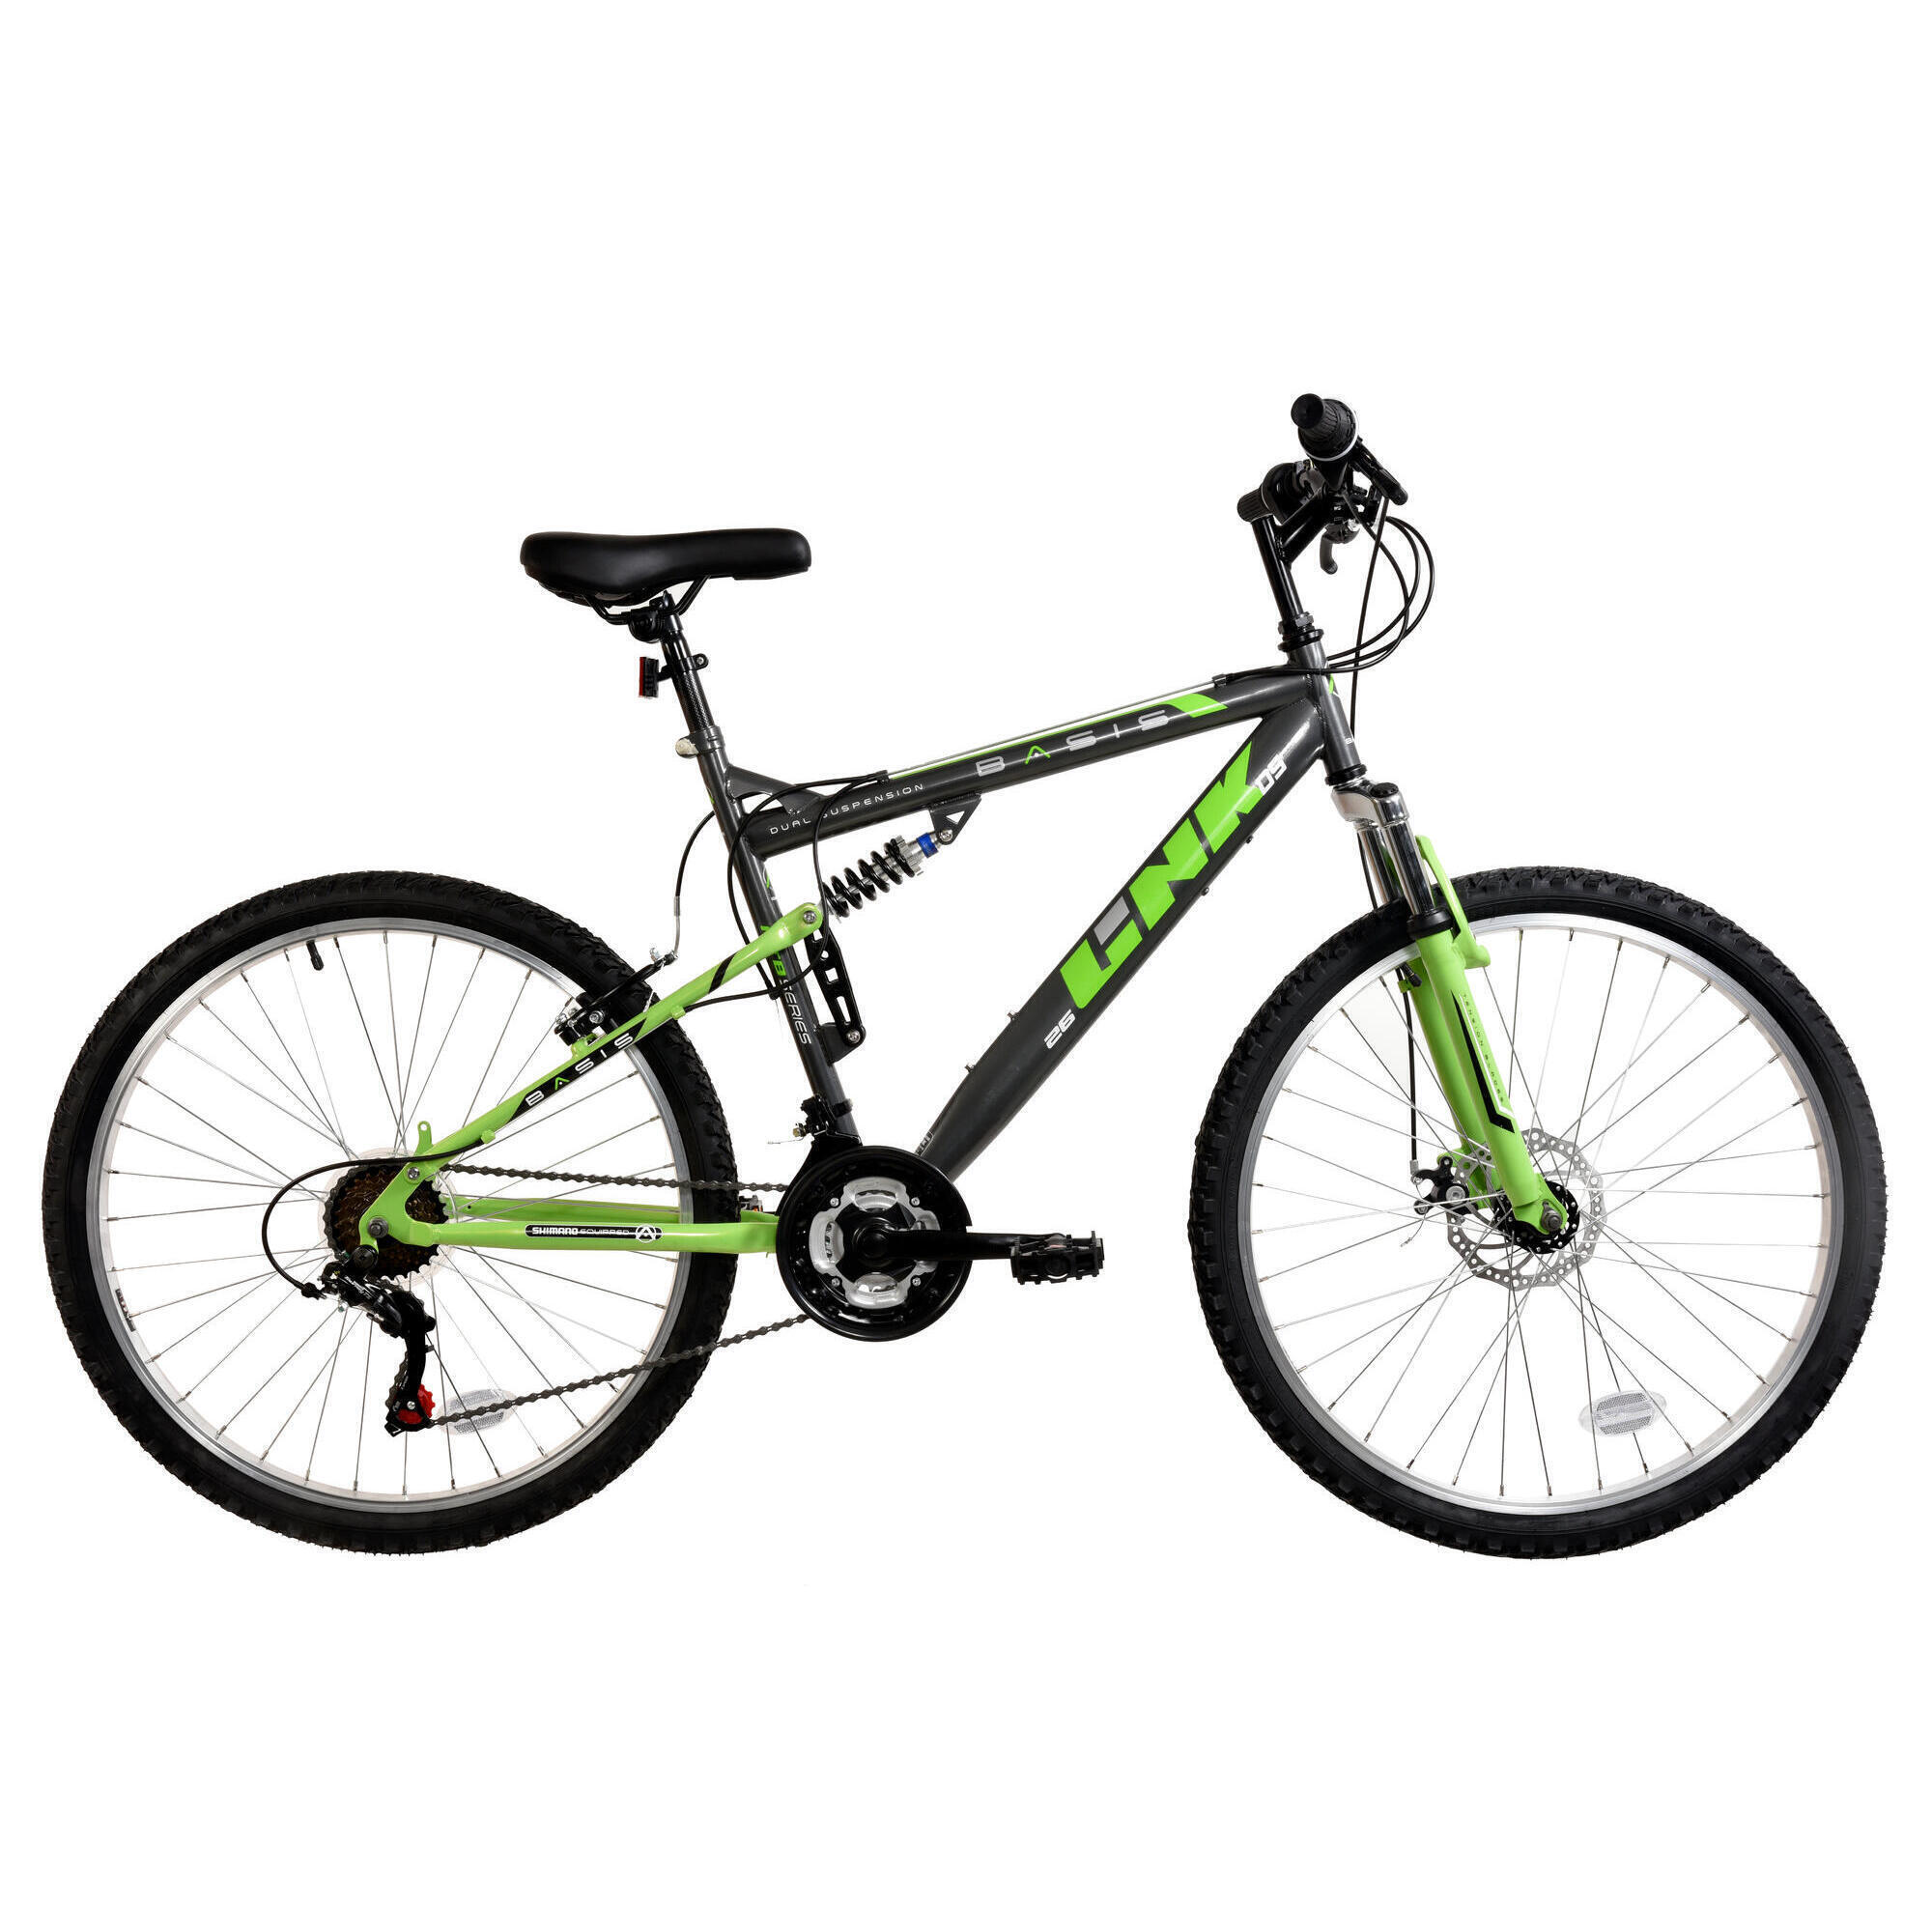 Basis Link Adult's Full Suspension Mountain Bike, 26In Wheel - Graphite/Lime 1/5